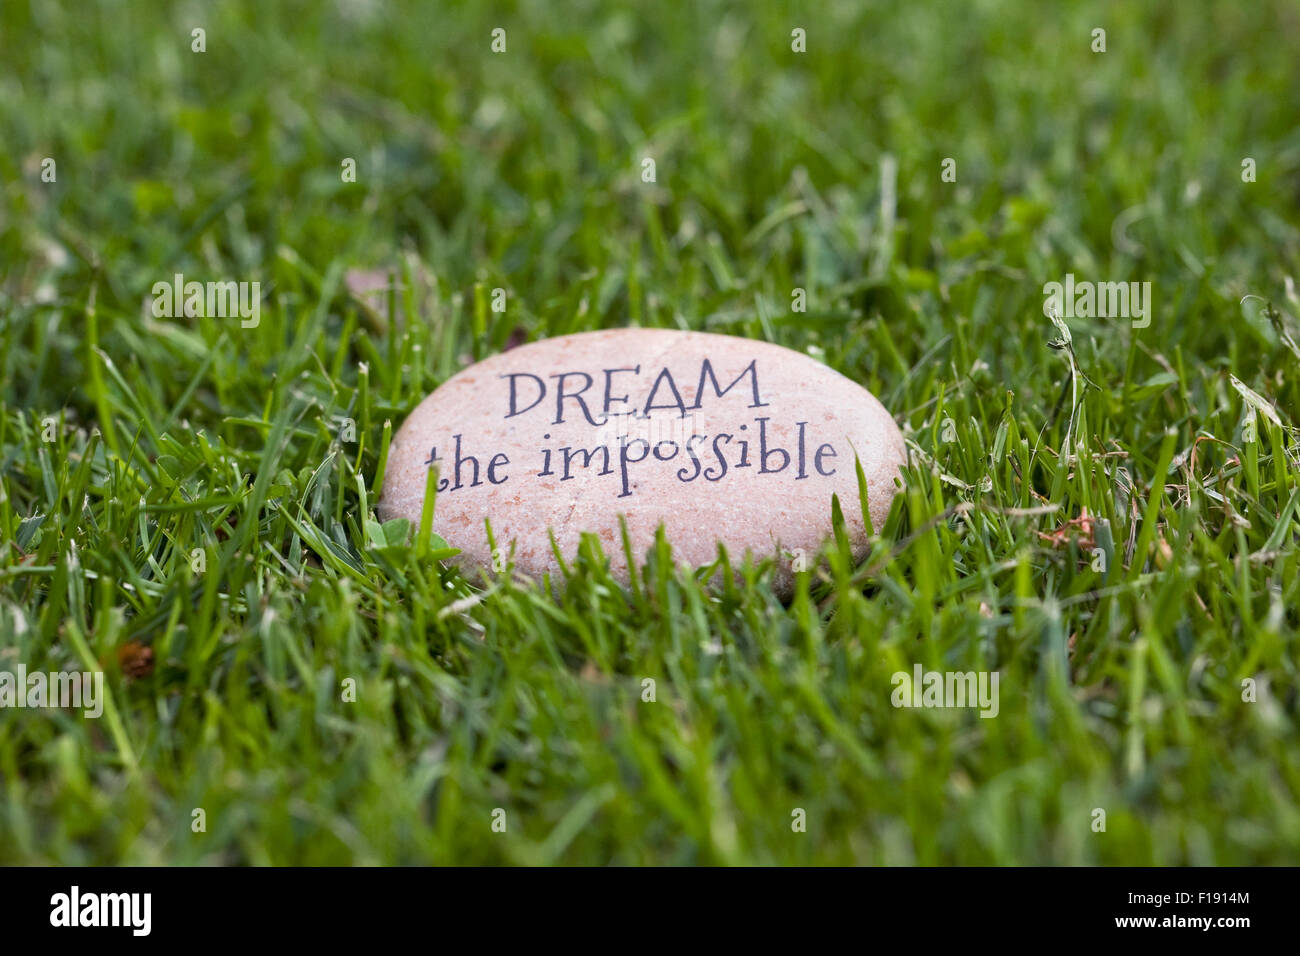 Dream the Impossible stone, in the grass. Stock Photo